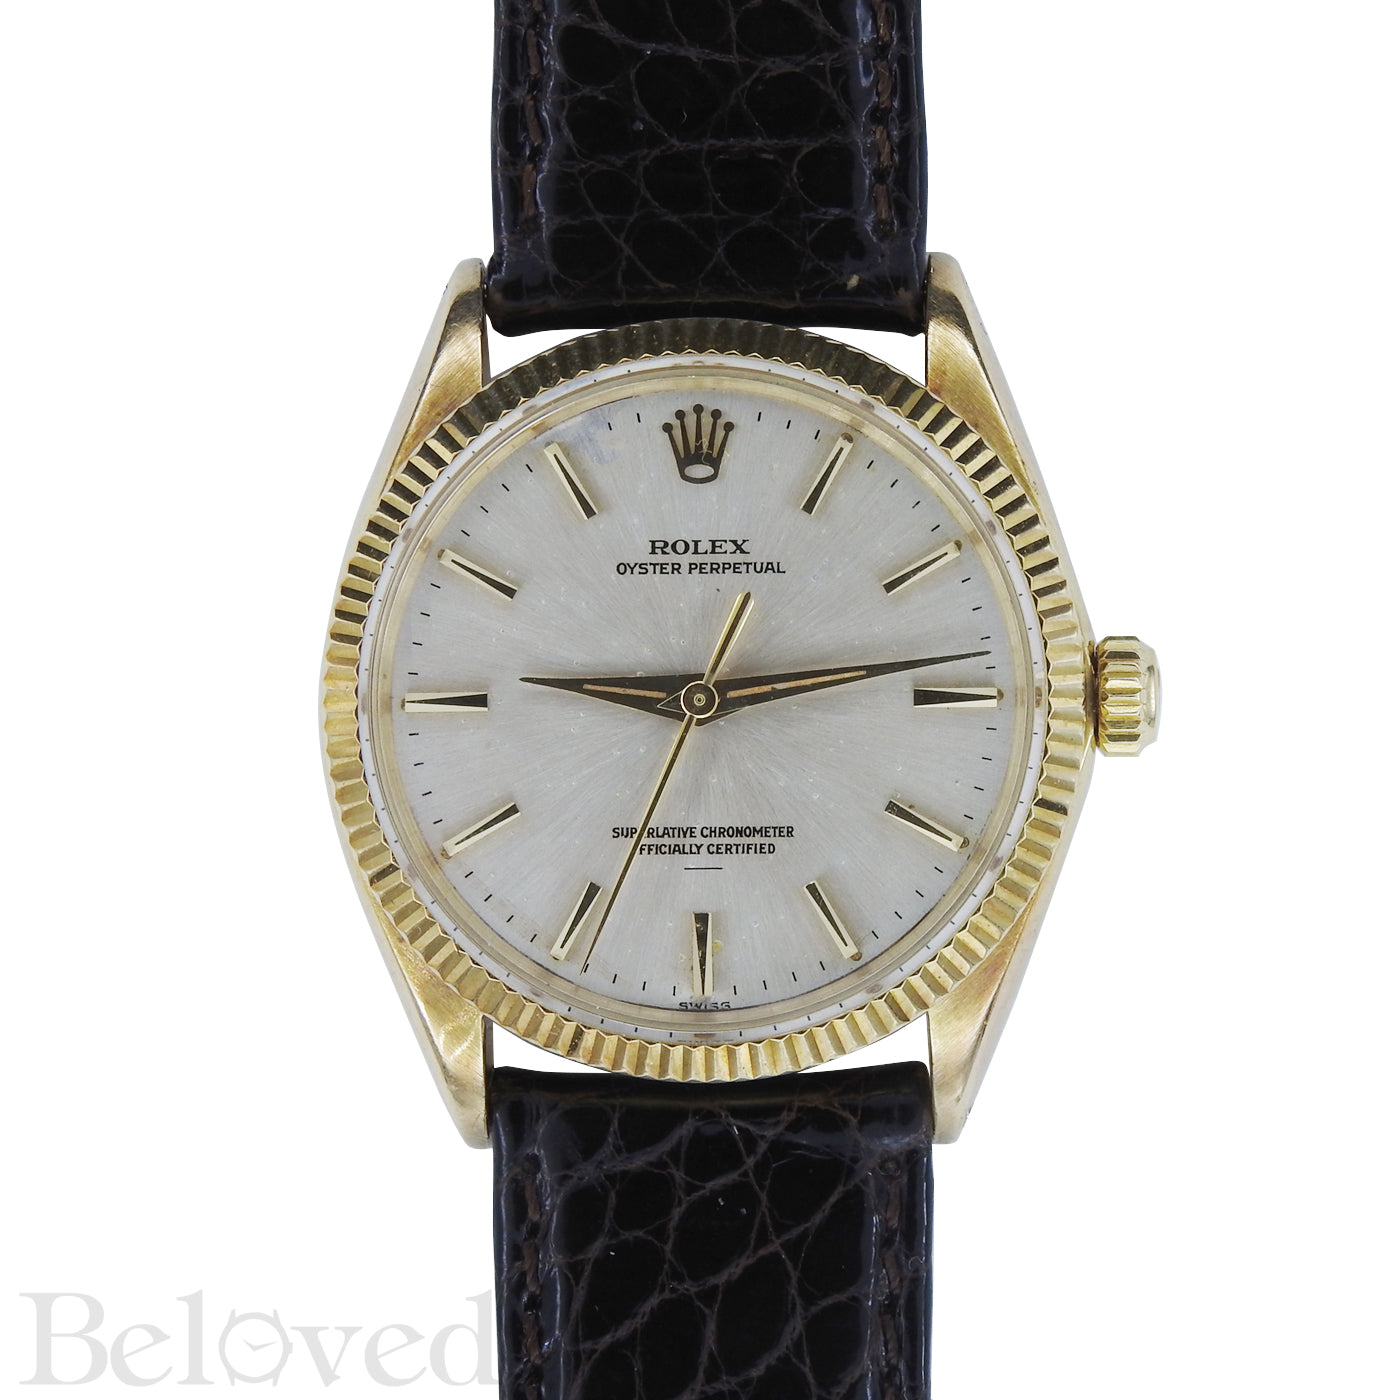 Rolex Oyster Perpetual "Underline" 1005 Image 1